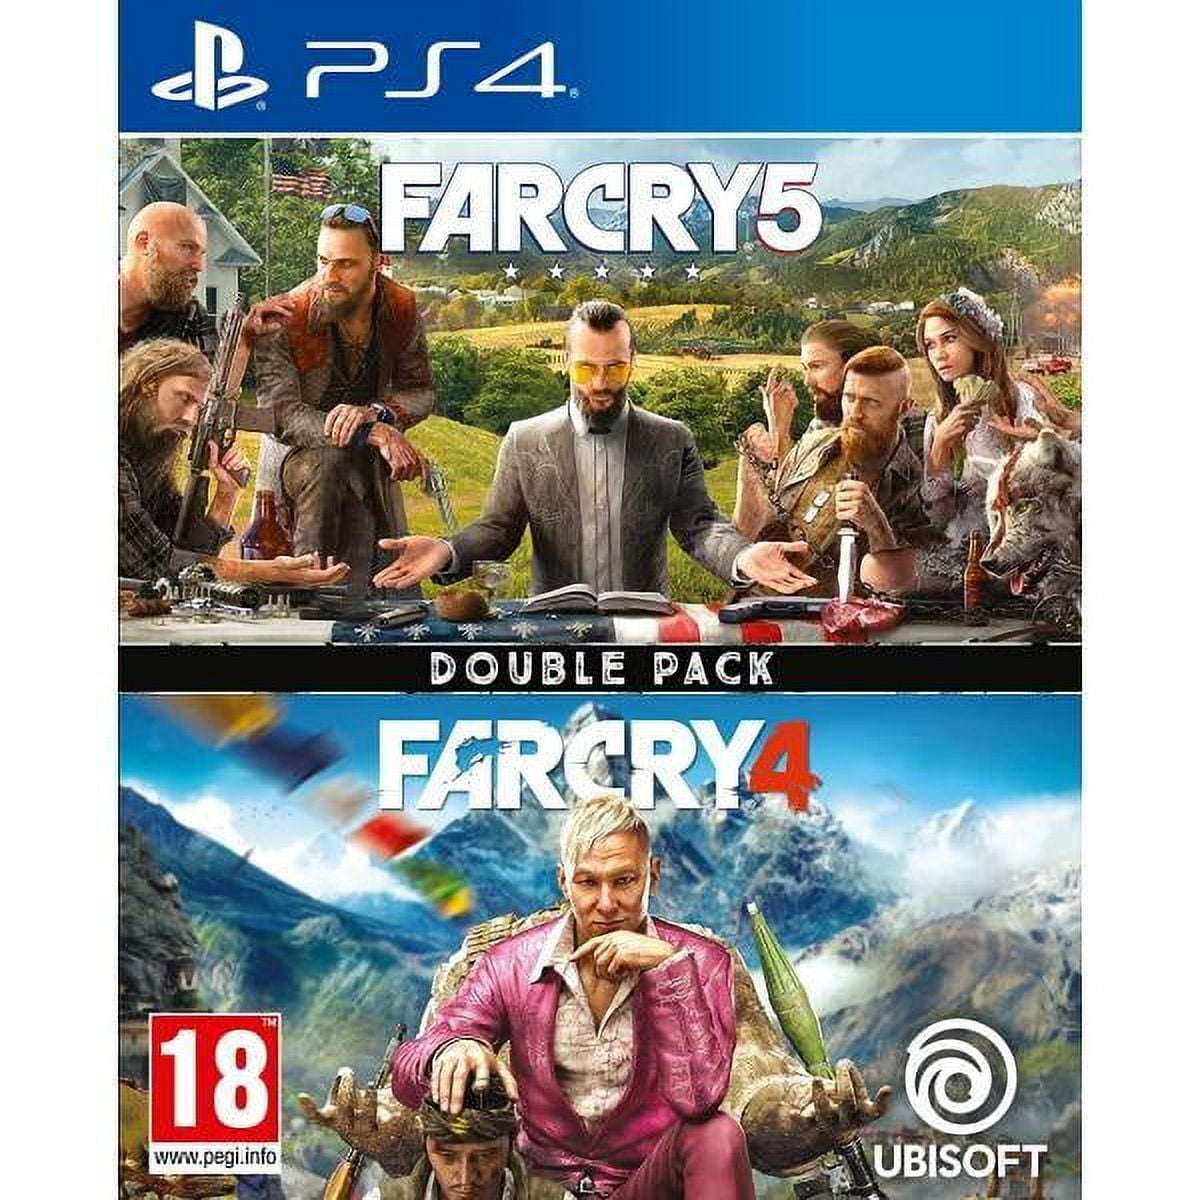 PlayStation Plus Game Catalog for December 2022 Includes Far Cry 5